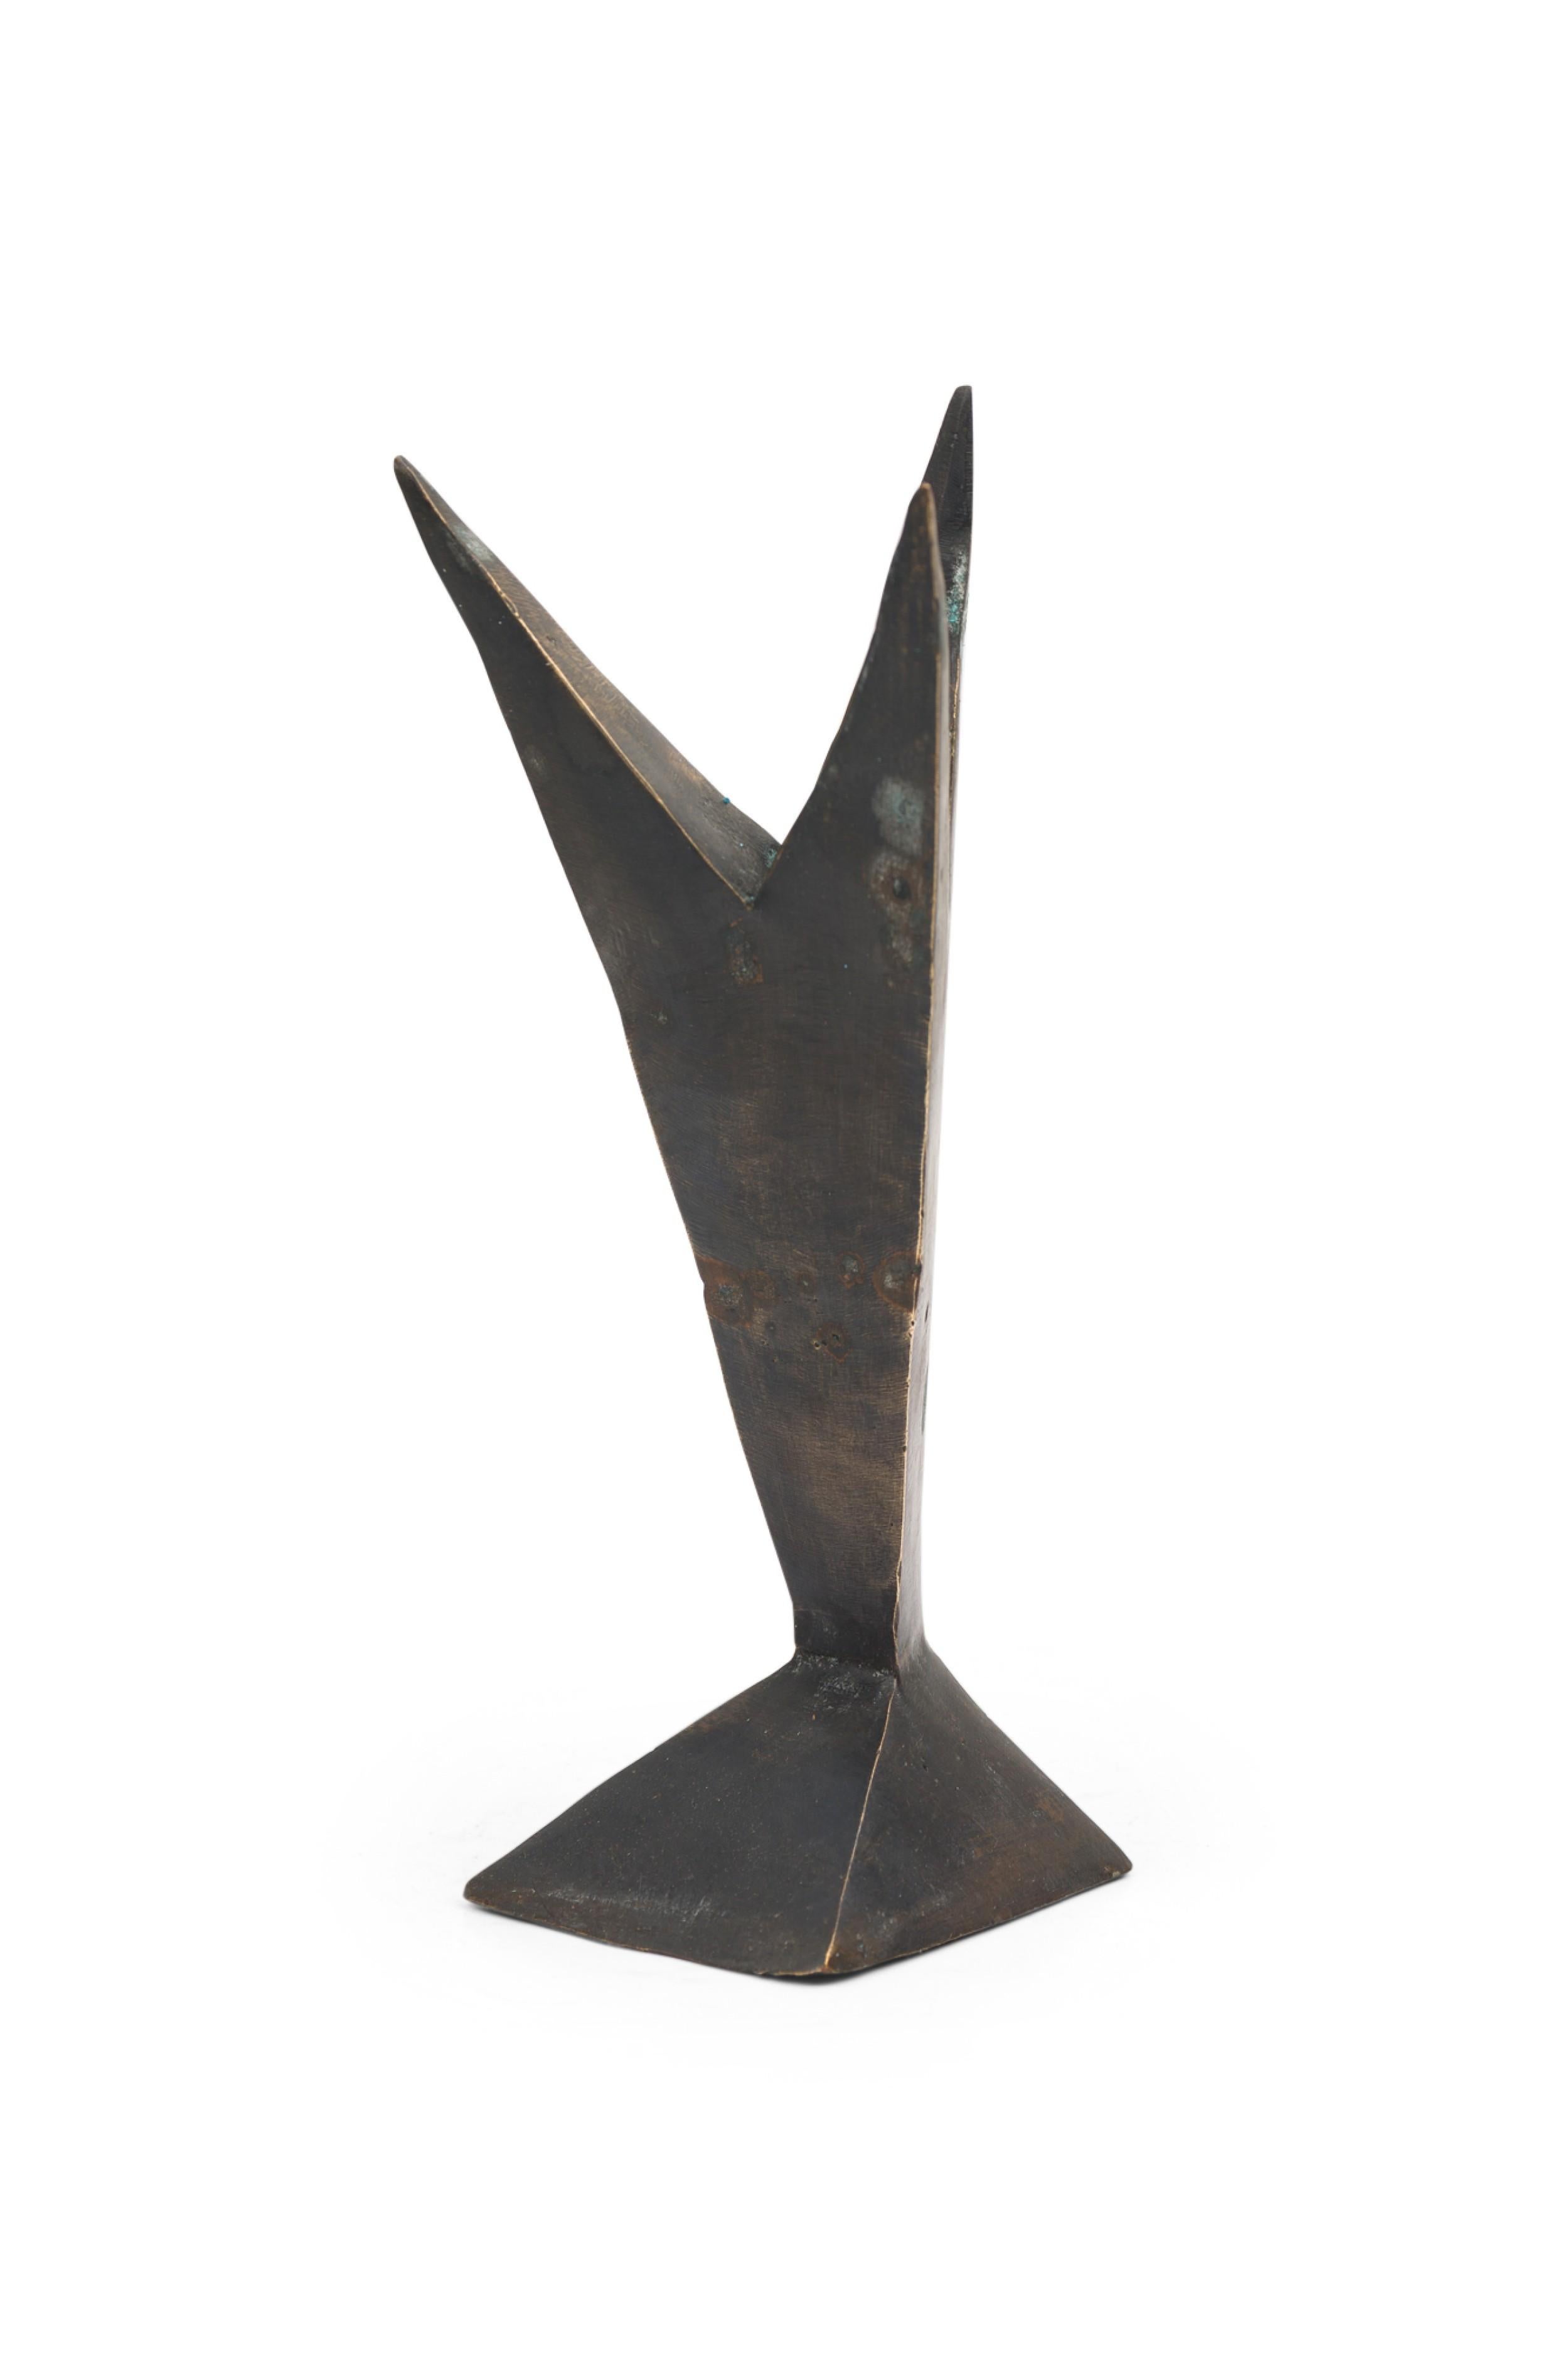 Contemporary hand-forged bronze claw-like abstract sculptur finished in an ebonized patina. (PRICED EACH) (